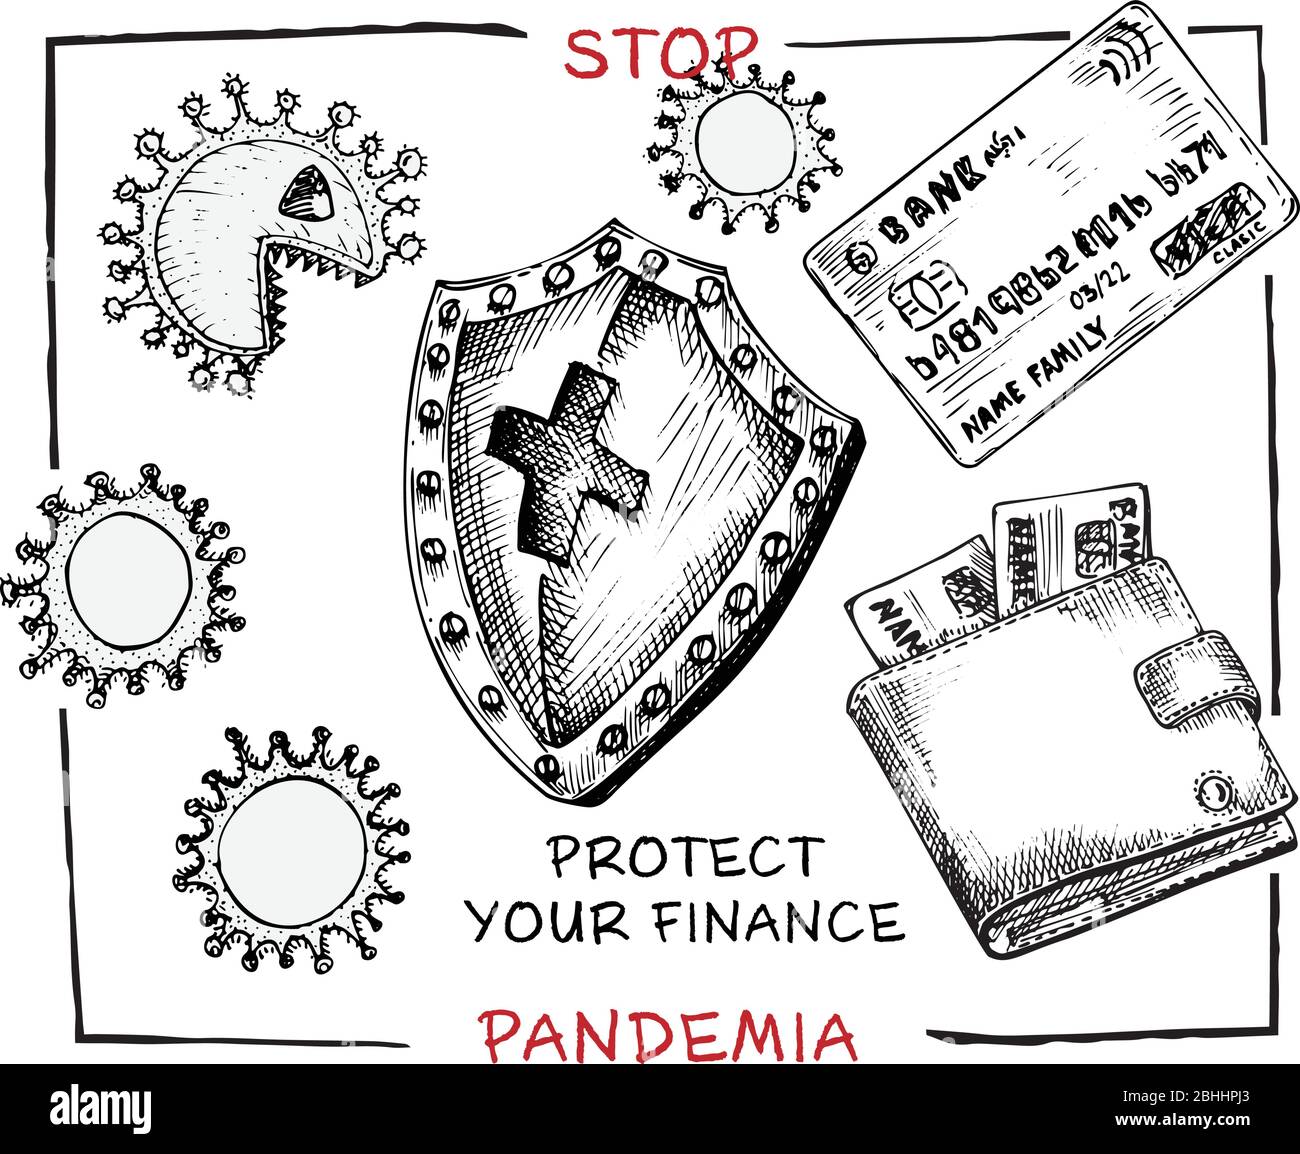 Design concept of economic and financial information agitational poster against coronavirus epidemic with text Stop pandemia Keep your finance healthy Stock Vector